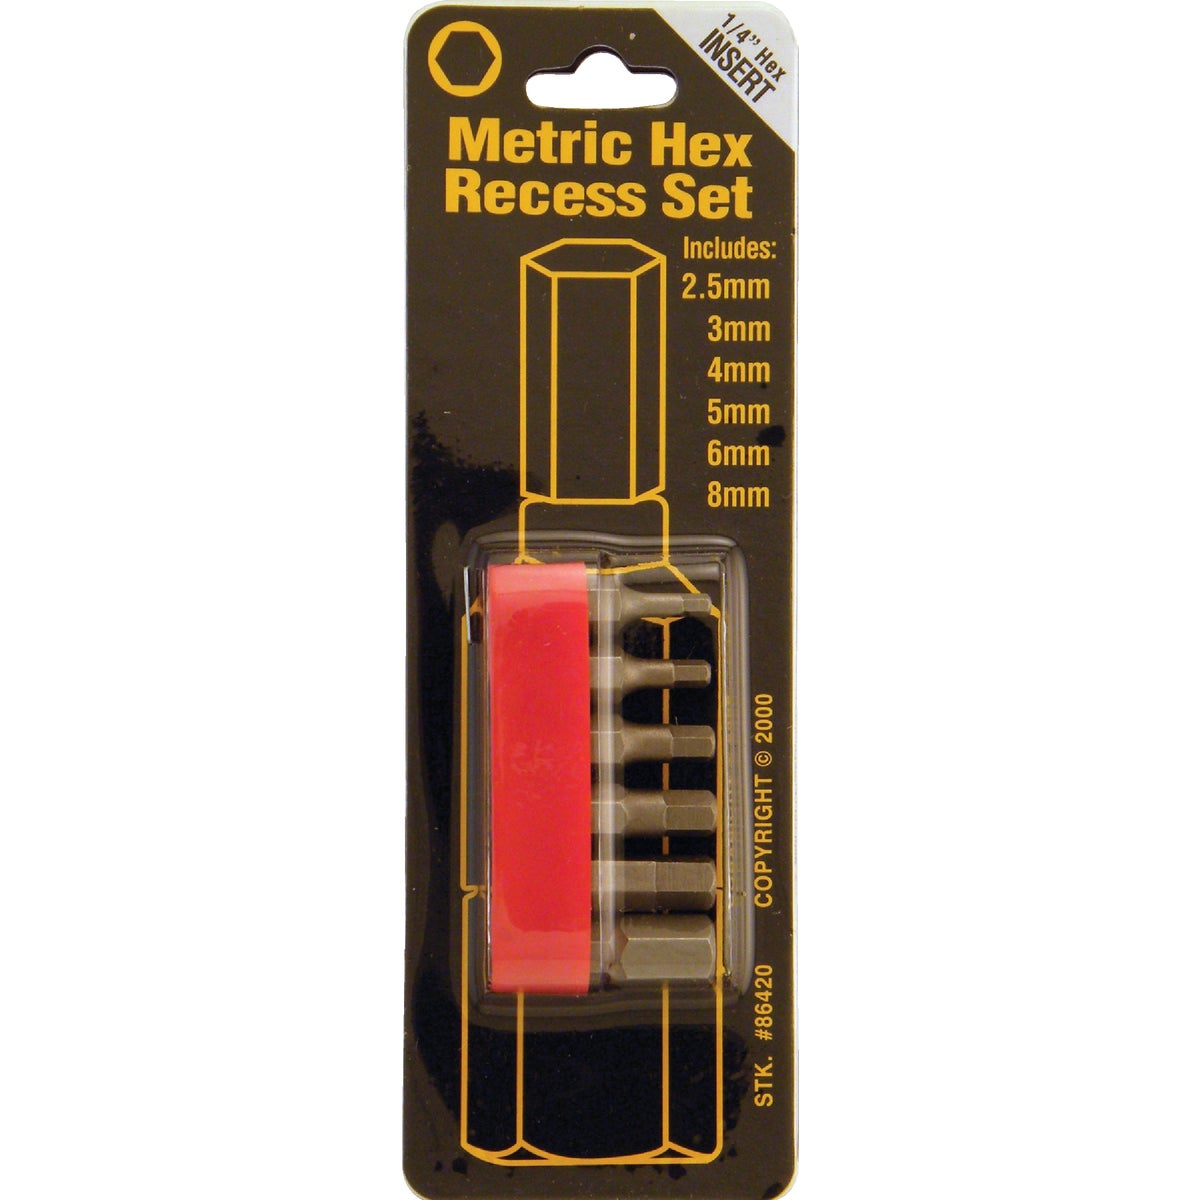 Item 397334, 1/4 In. hex shank fits all standard bit holders and hand-held drivers.